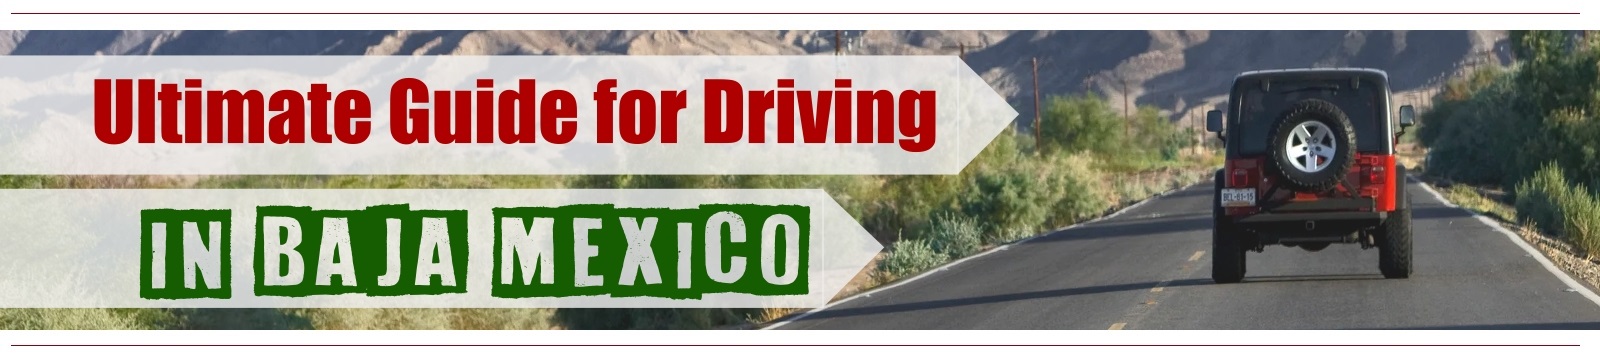 Travel Guide for Driving in Baja Mexico